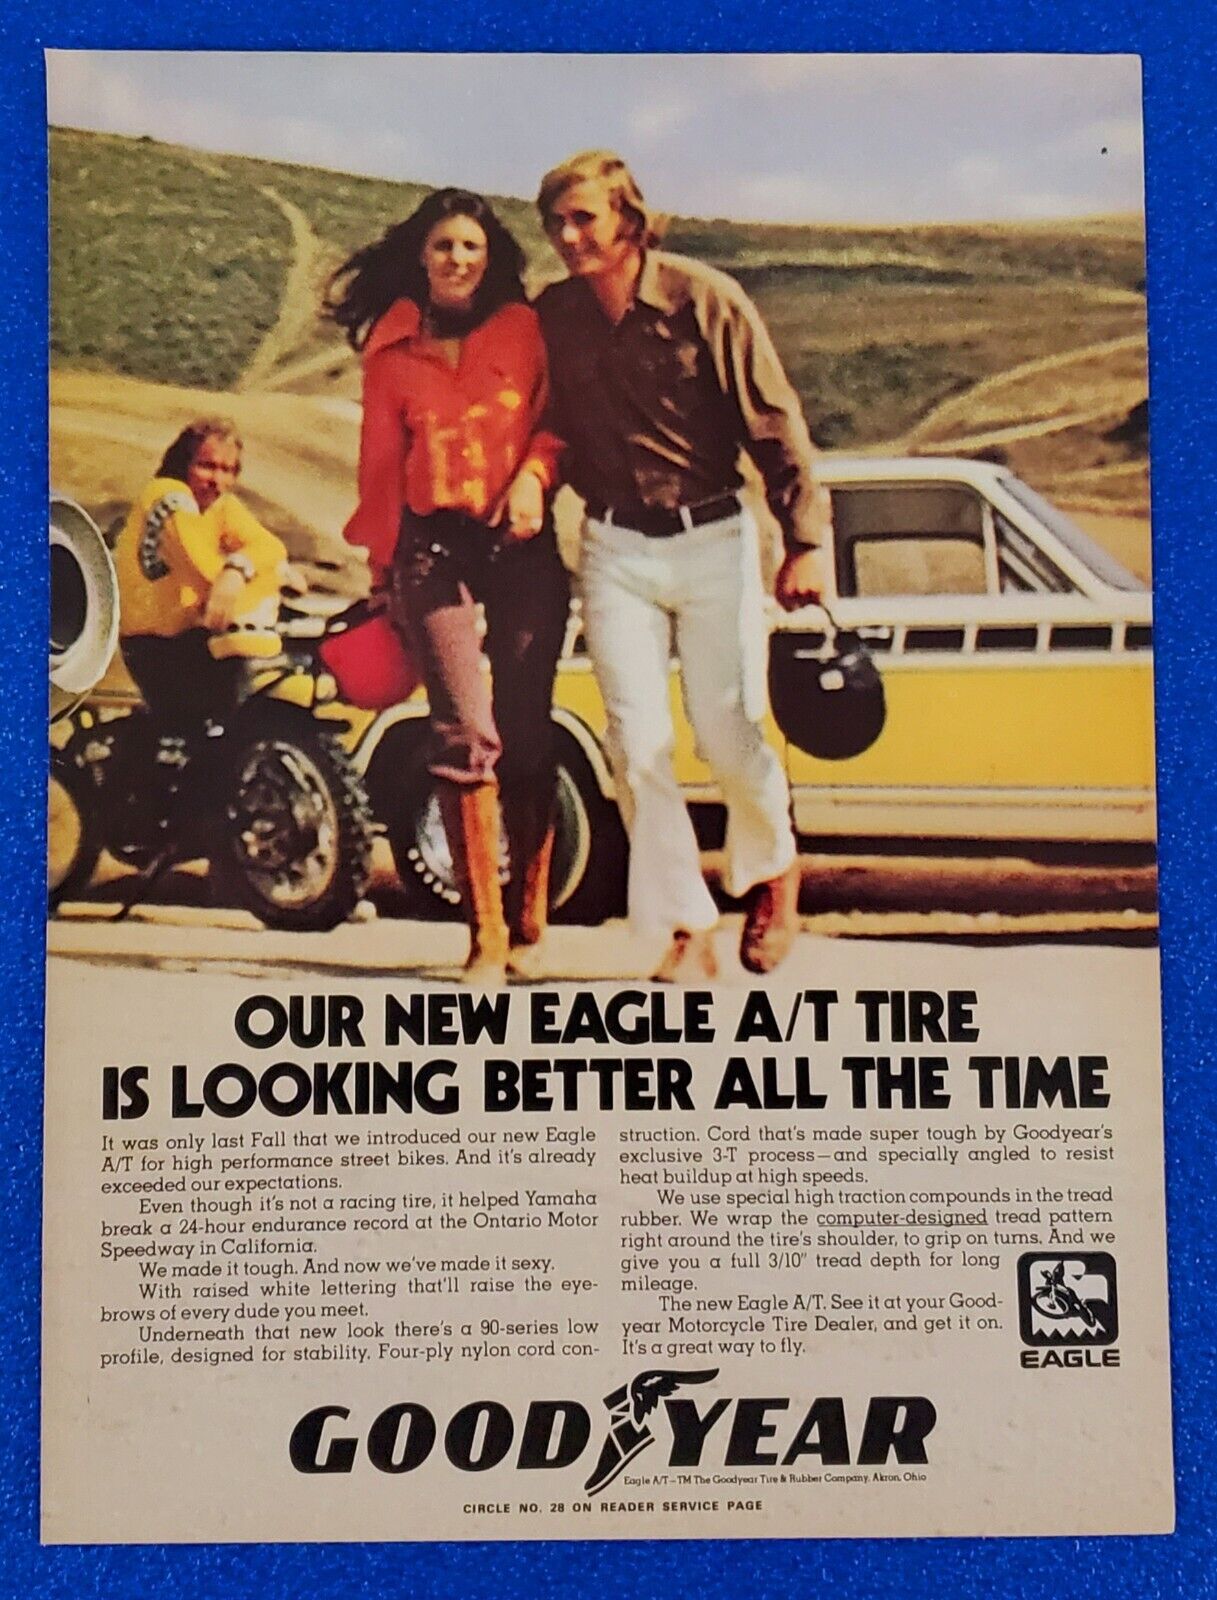 1970 GOODYEAR EAGLE A/T MOTORCYCLE TIRE ORIGINAL CLASSIC PRINT AD YAMAHA RECORD